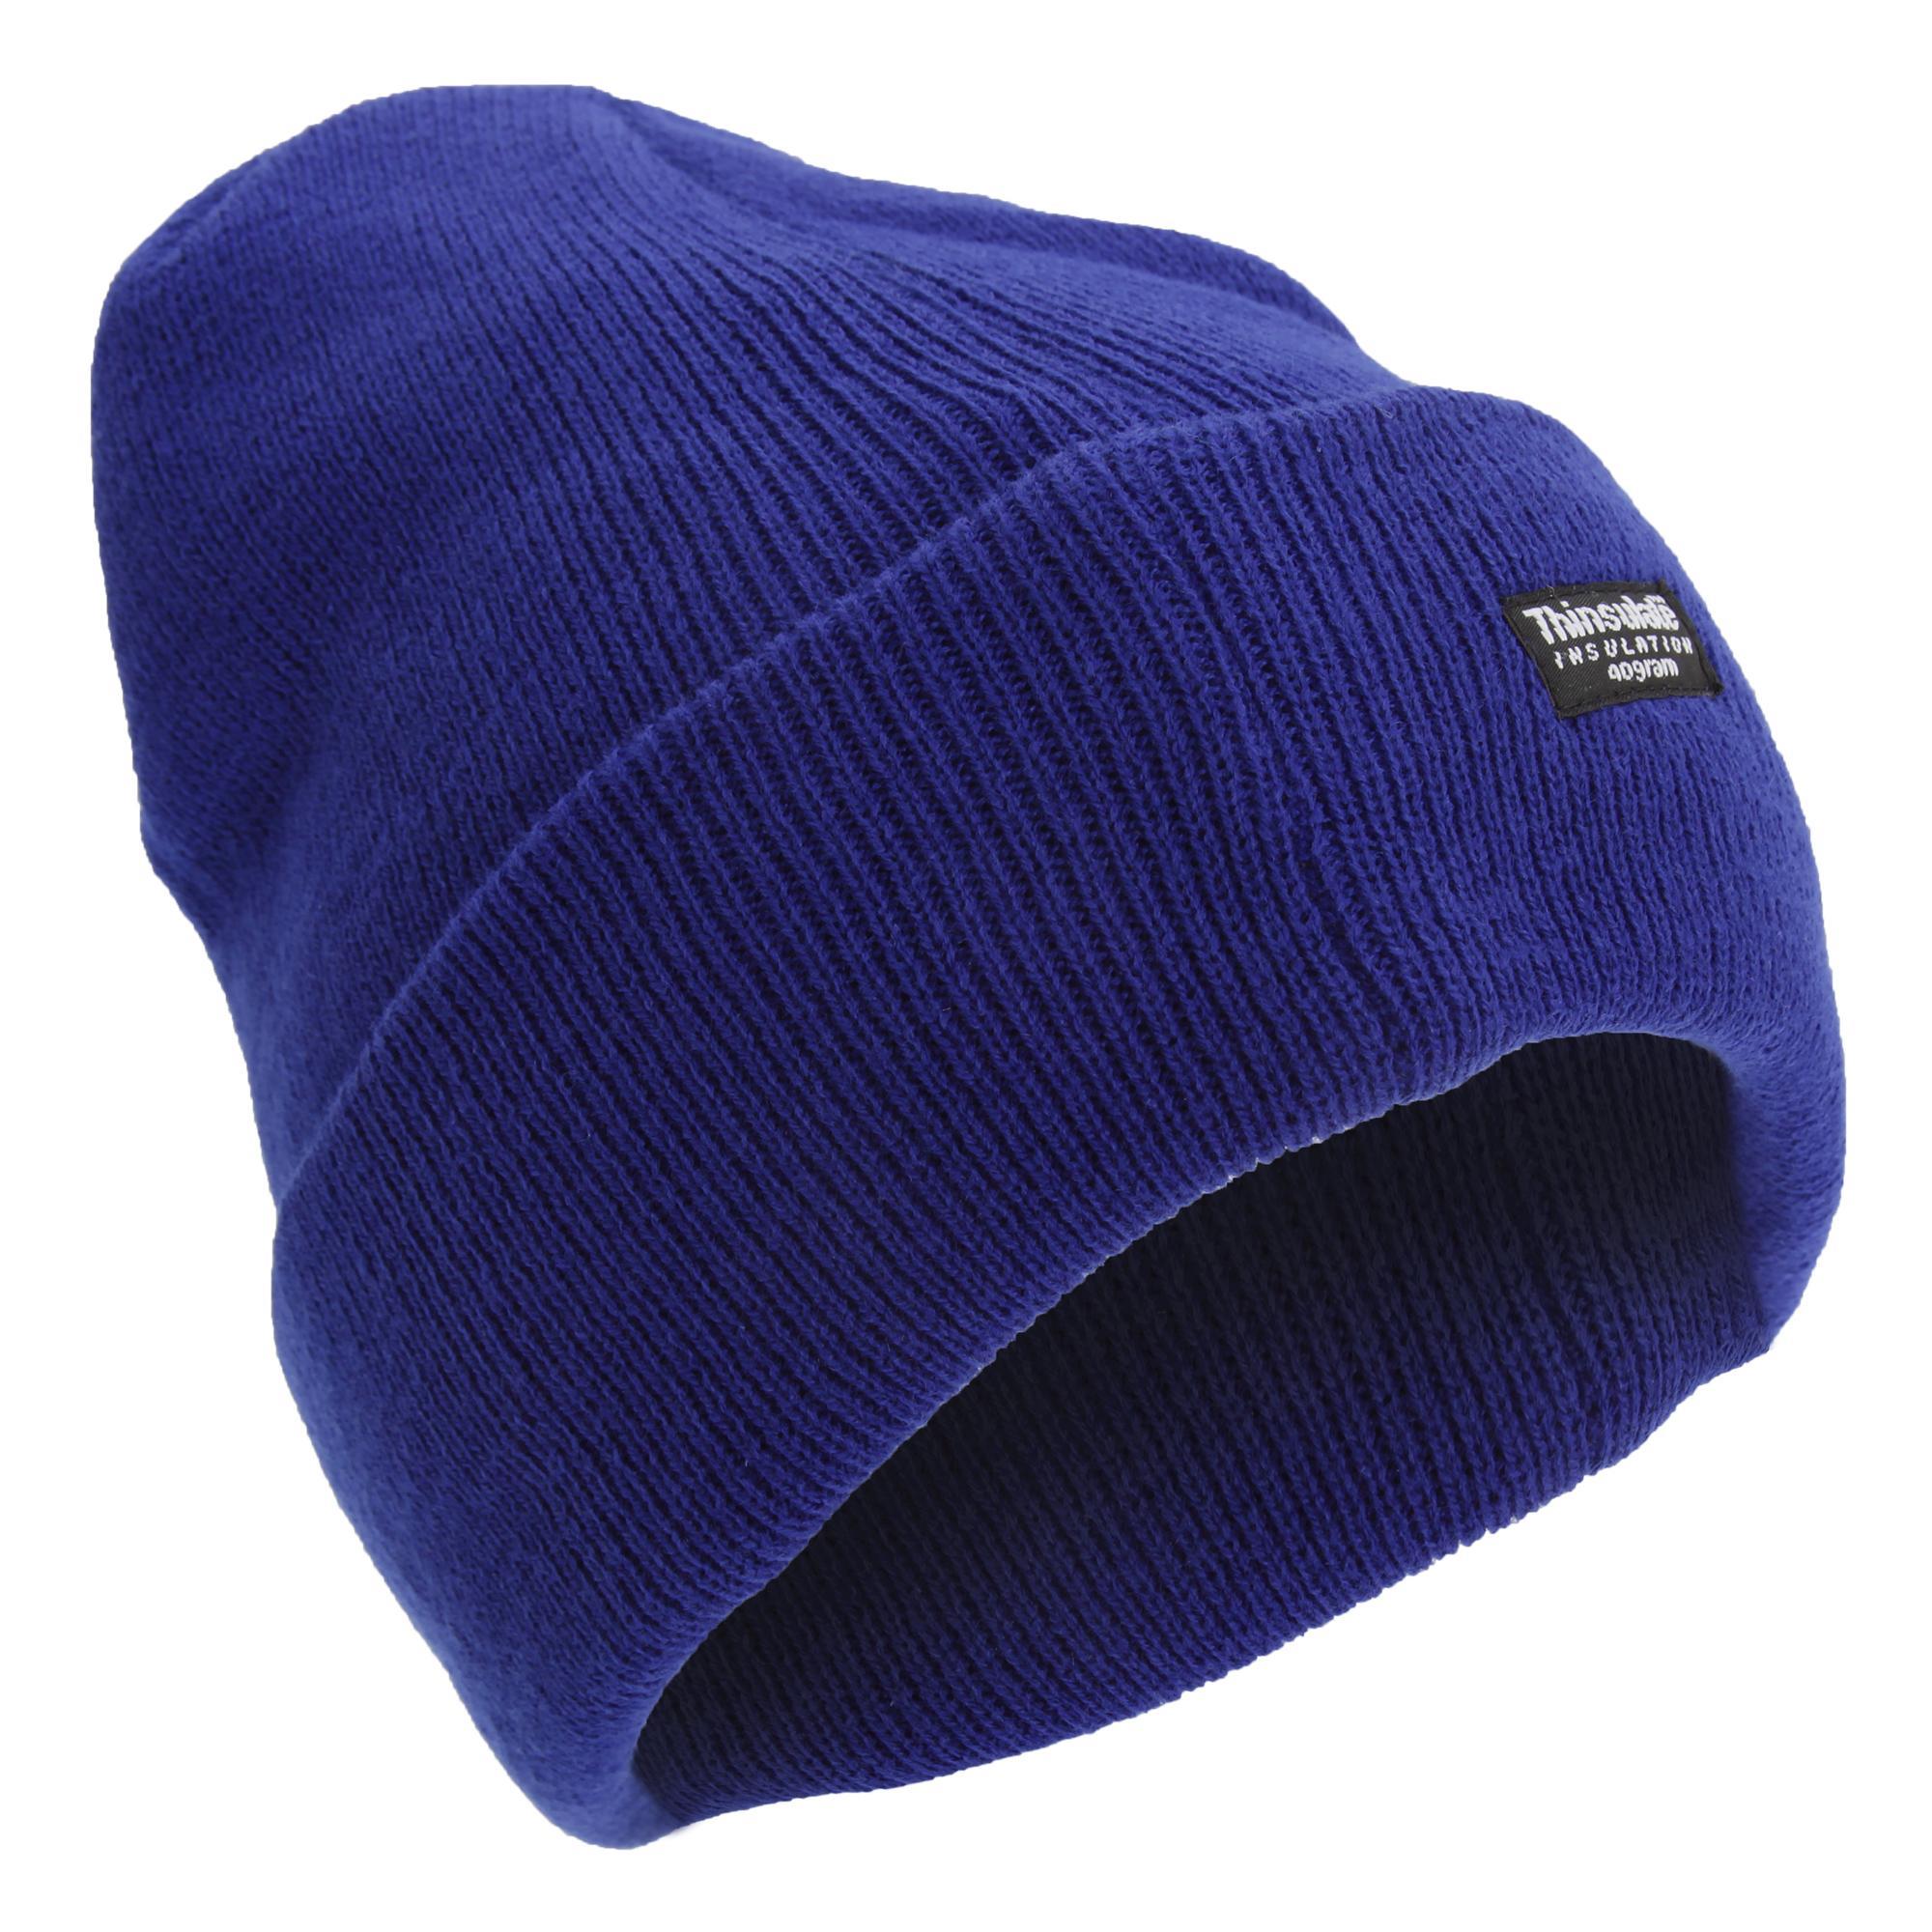 Regatta Unisex Thinsulate Lined Winter Hat (Classic Royal) (One Size)